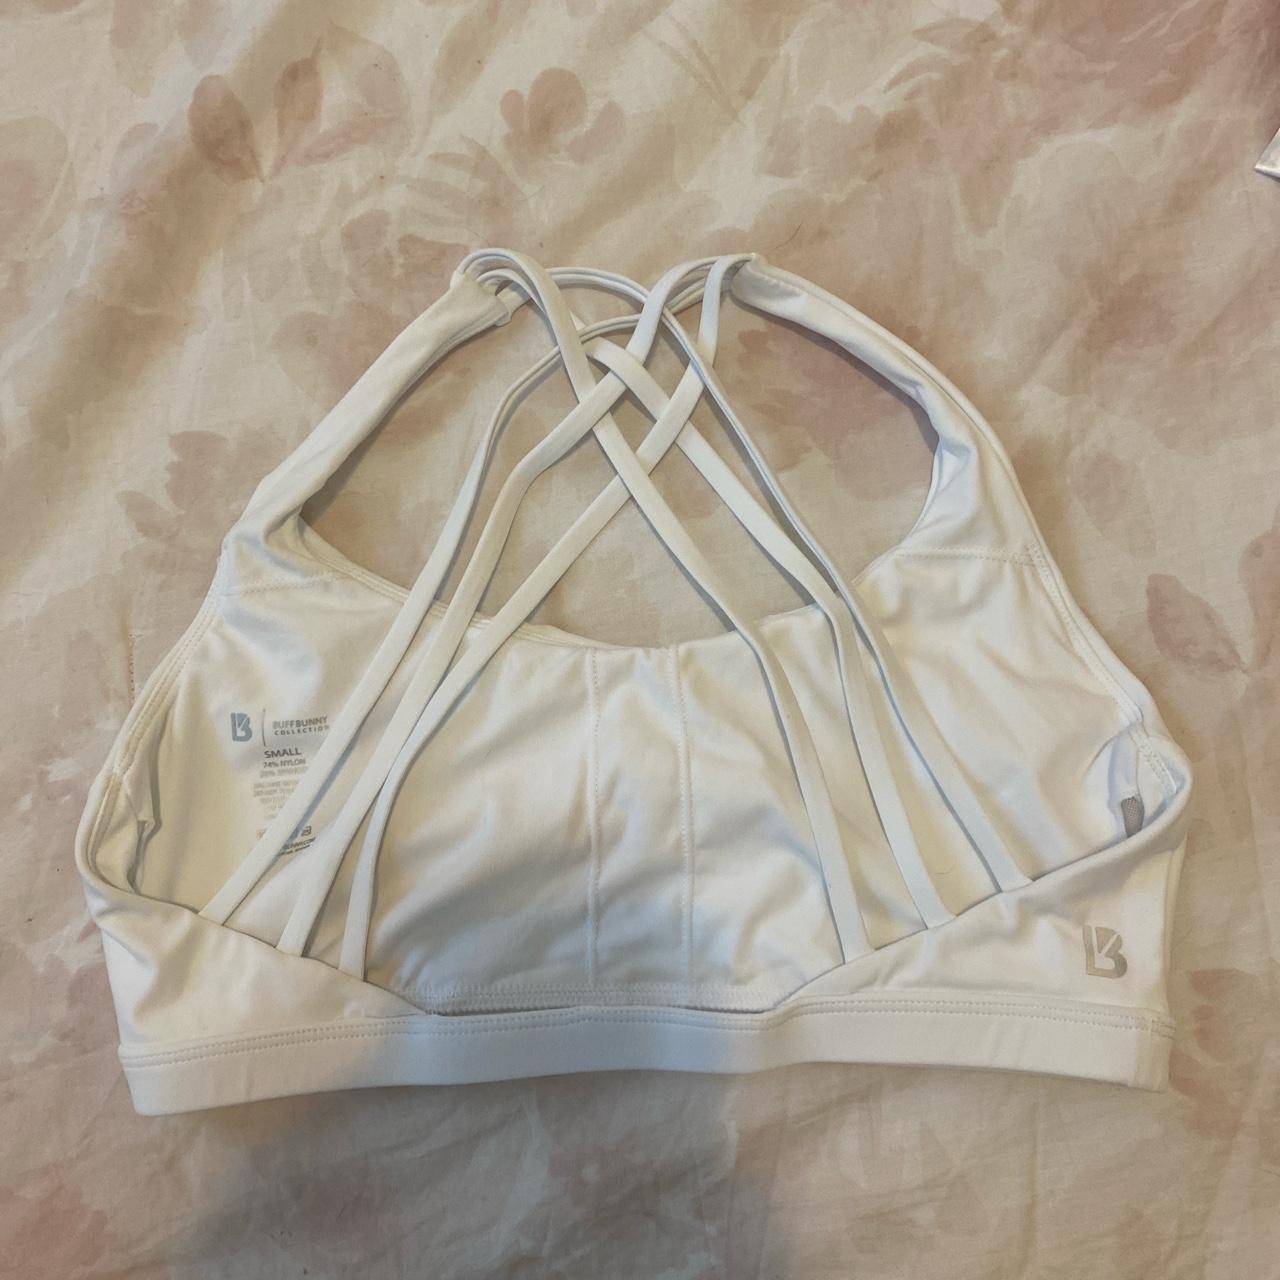 BUFFBUNNY WHITE SPORTS BRA SIZE SMALL This sports... - Depop